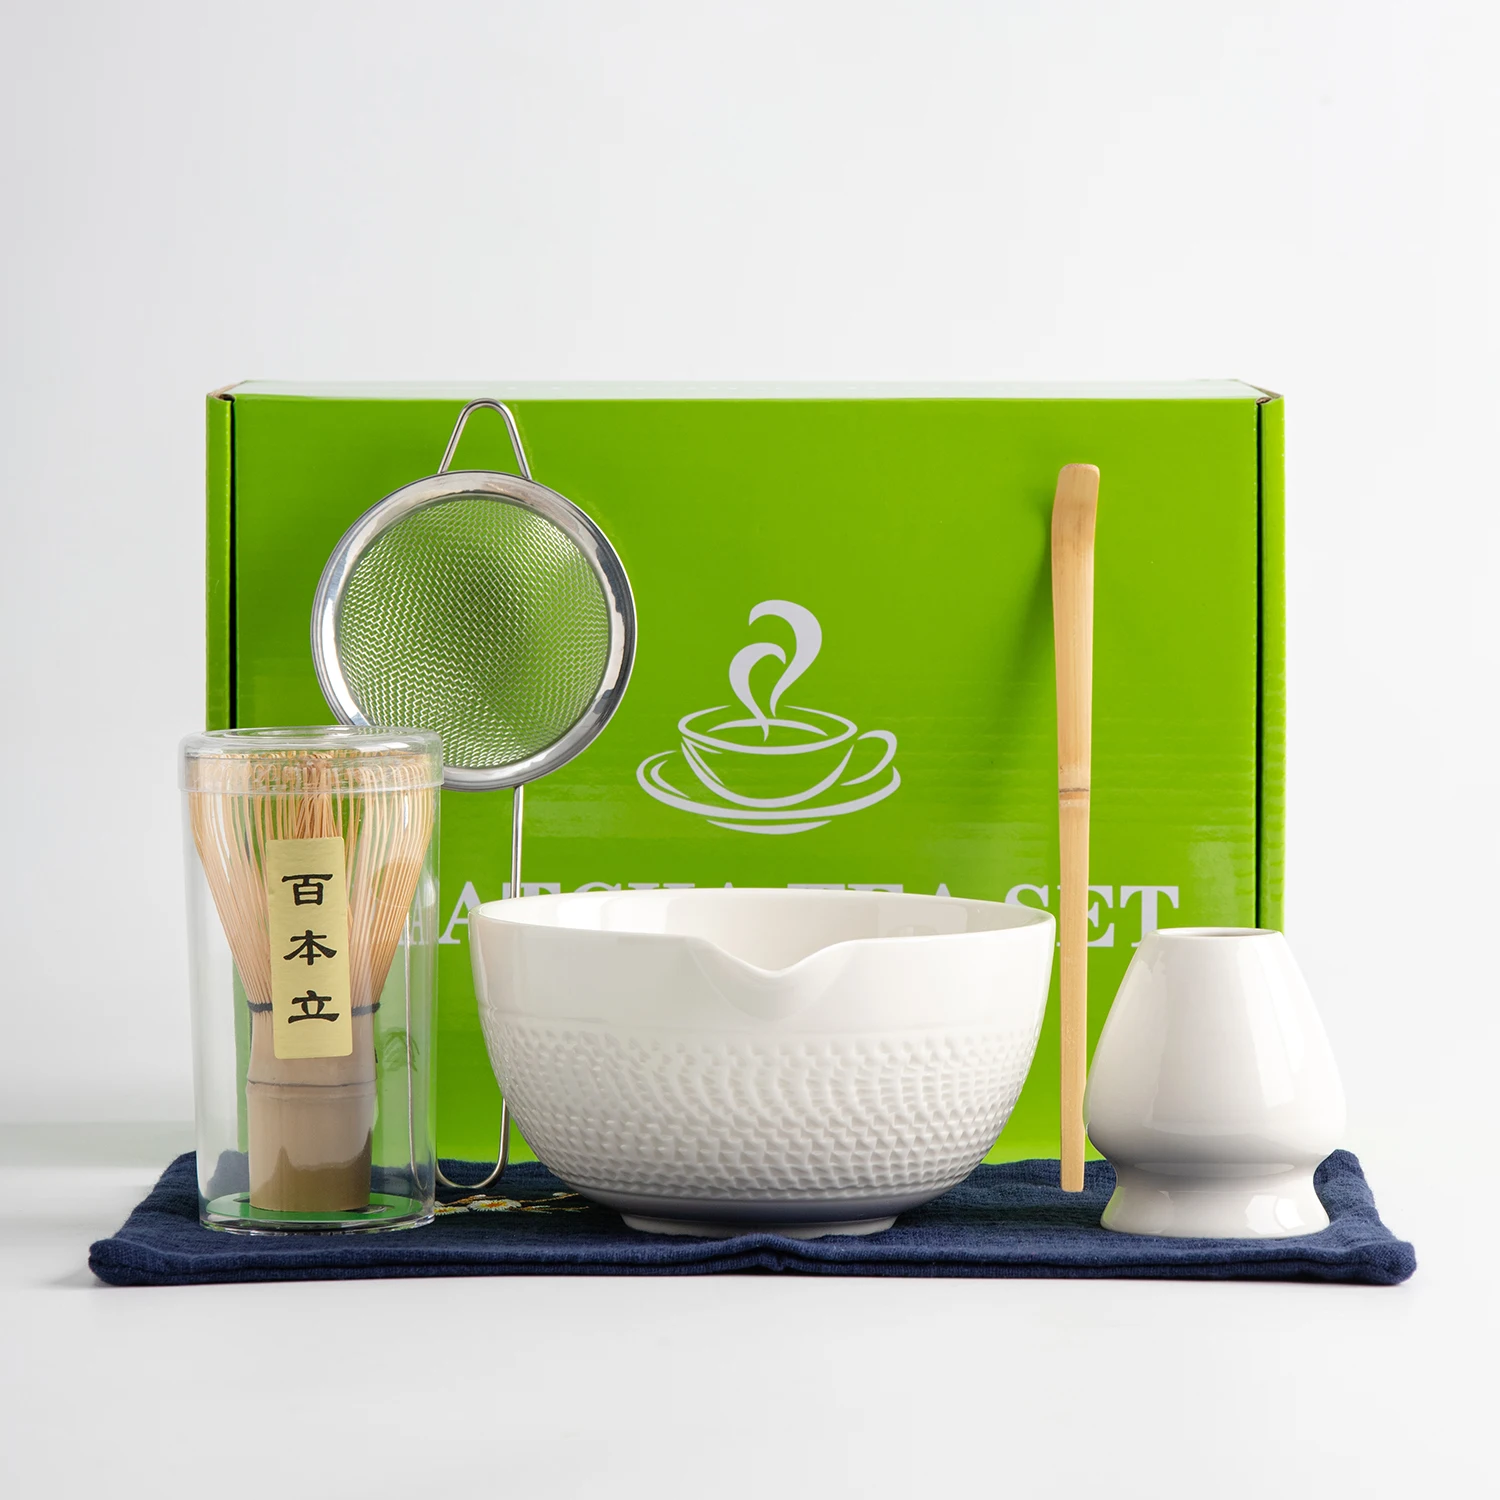  Marce Matcha Set - Whisk, Bowl, Sifter, Holder and Spoon -  Perfect Matcha Tea Kit (White) : Home & Kitchen